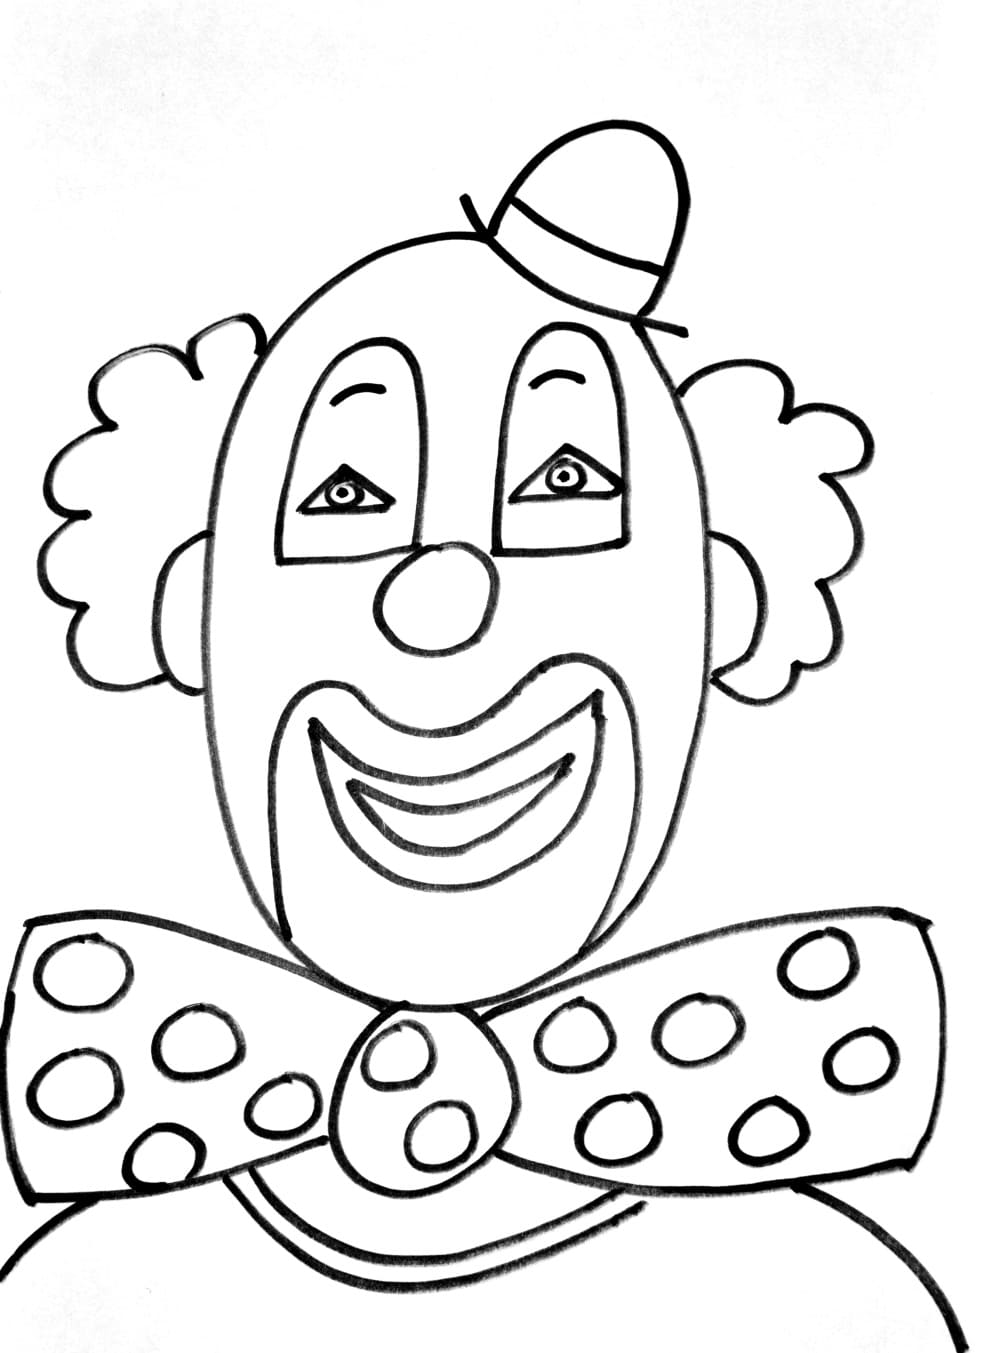 Clown Heavenly Coloring Page